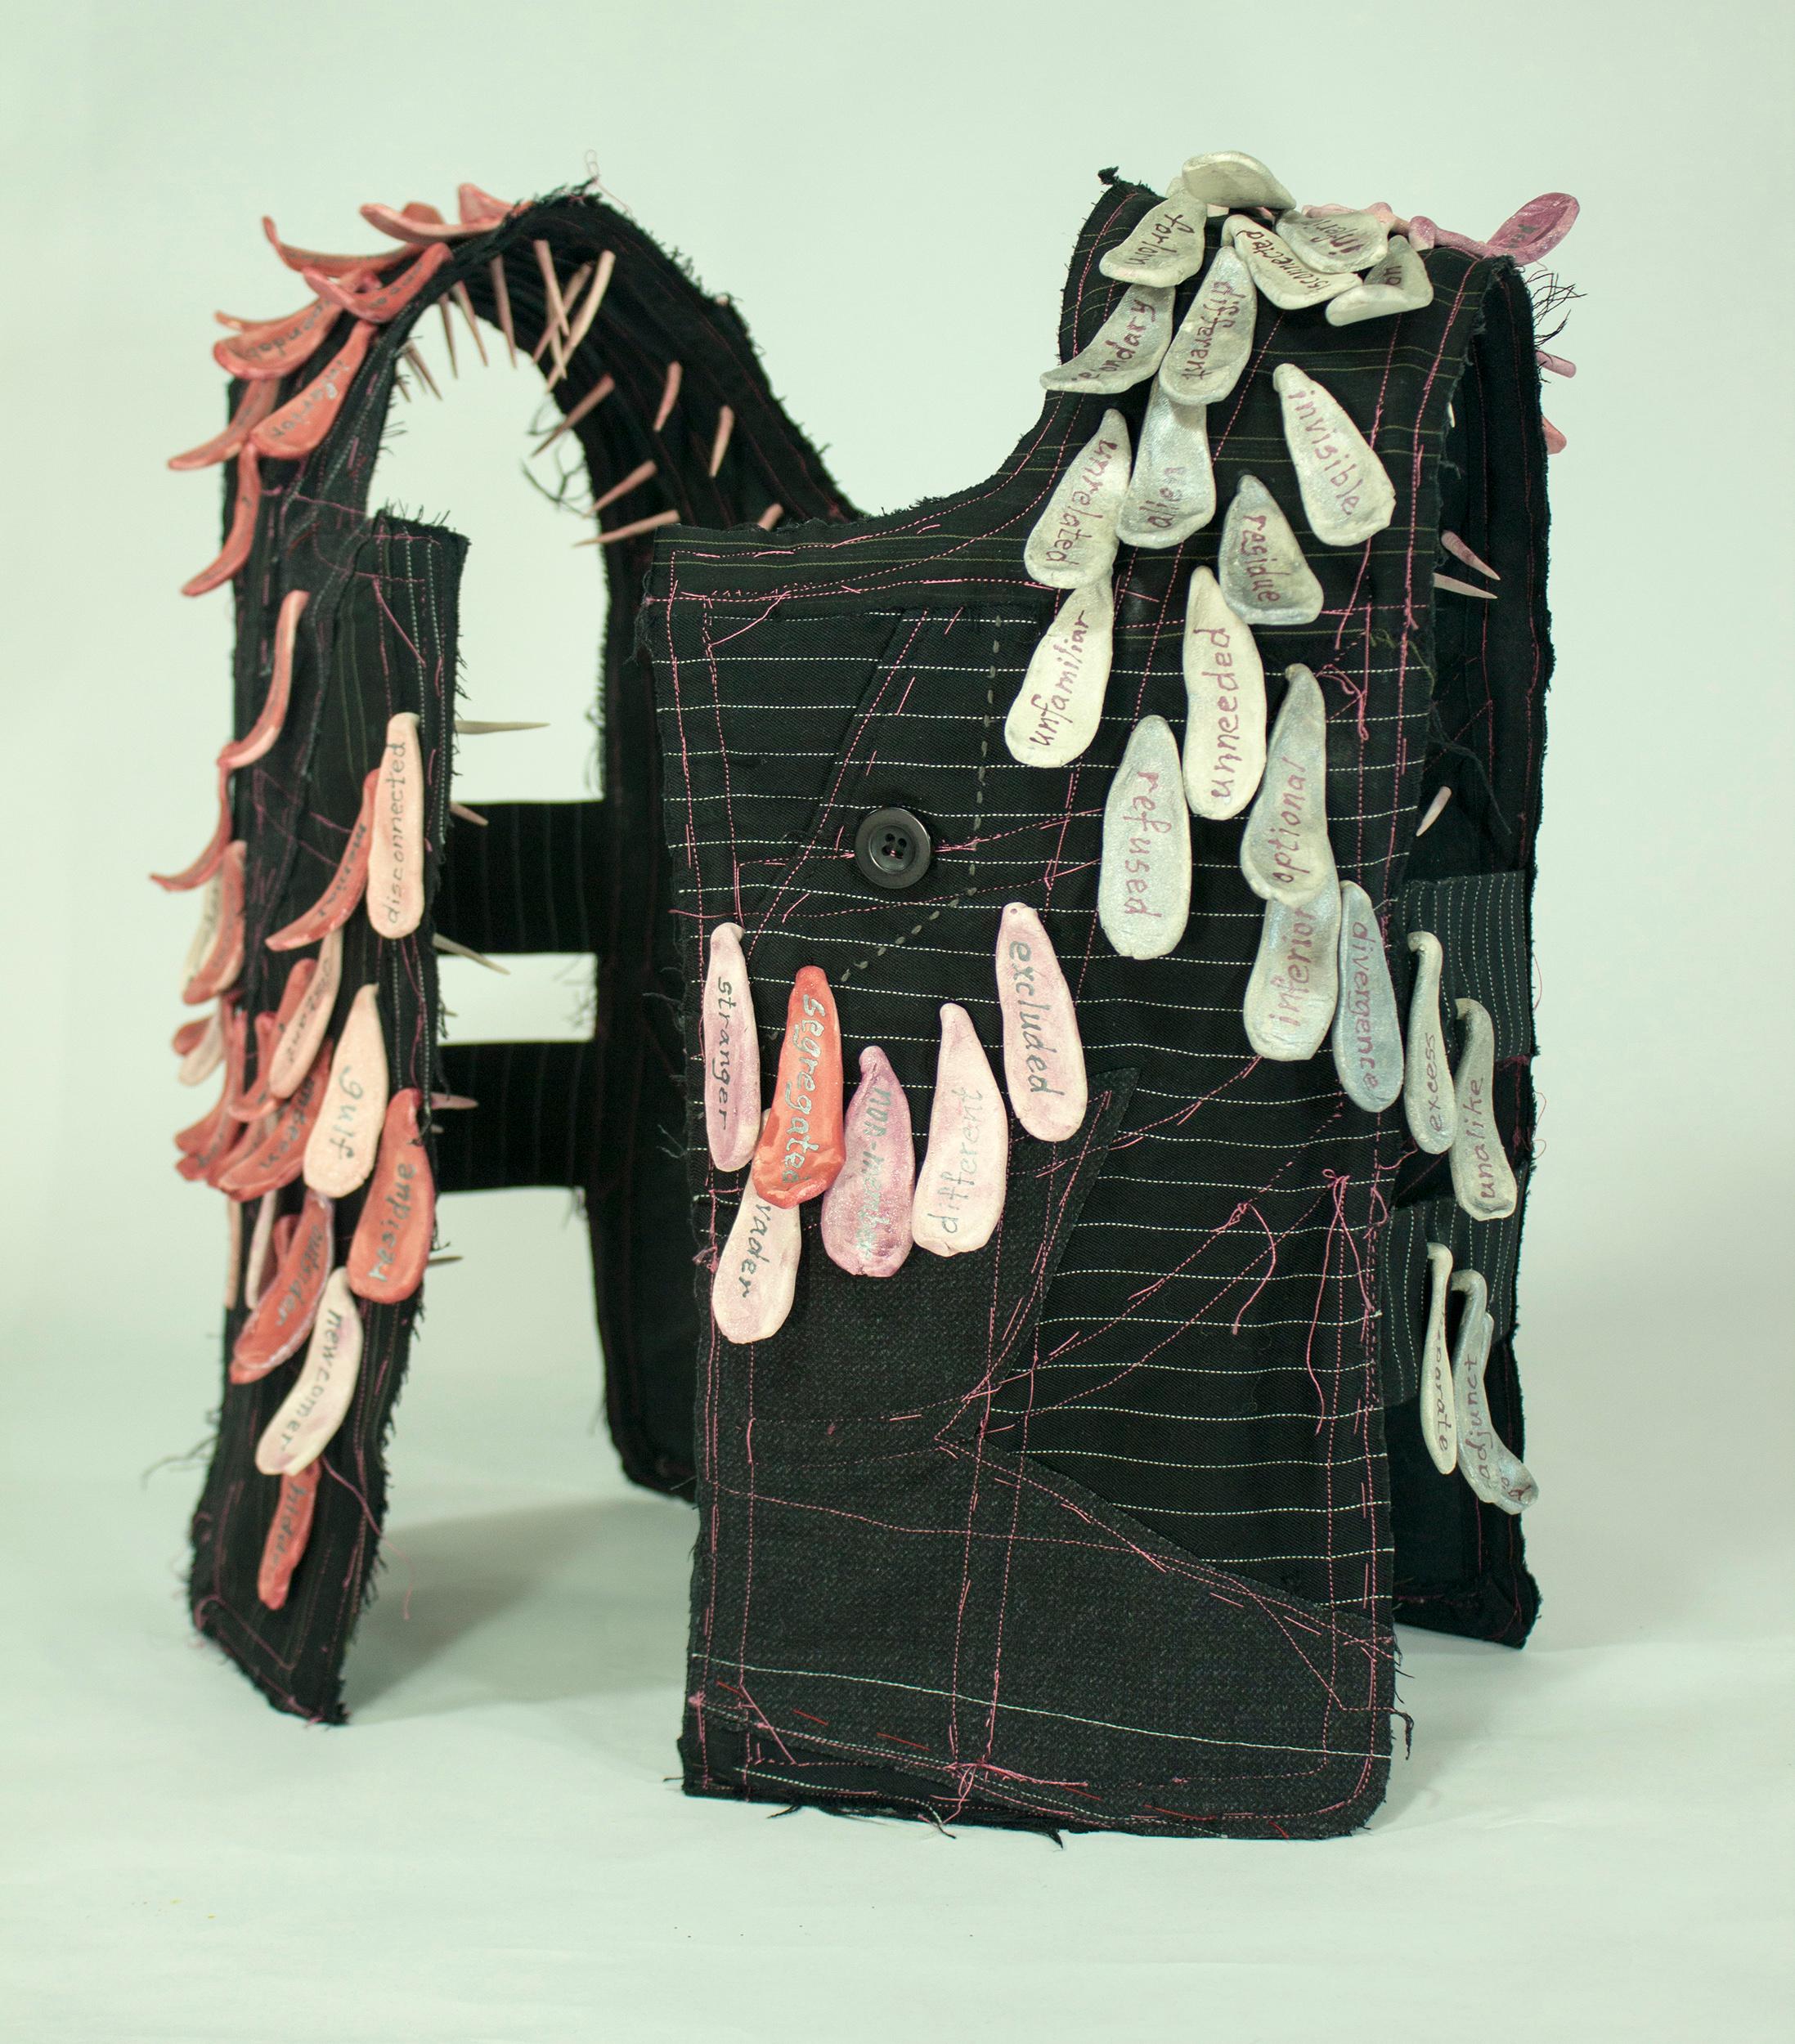 "Other", contemporary, vest, ceramic, black, white, pink, mixed media, sculpture